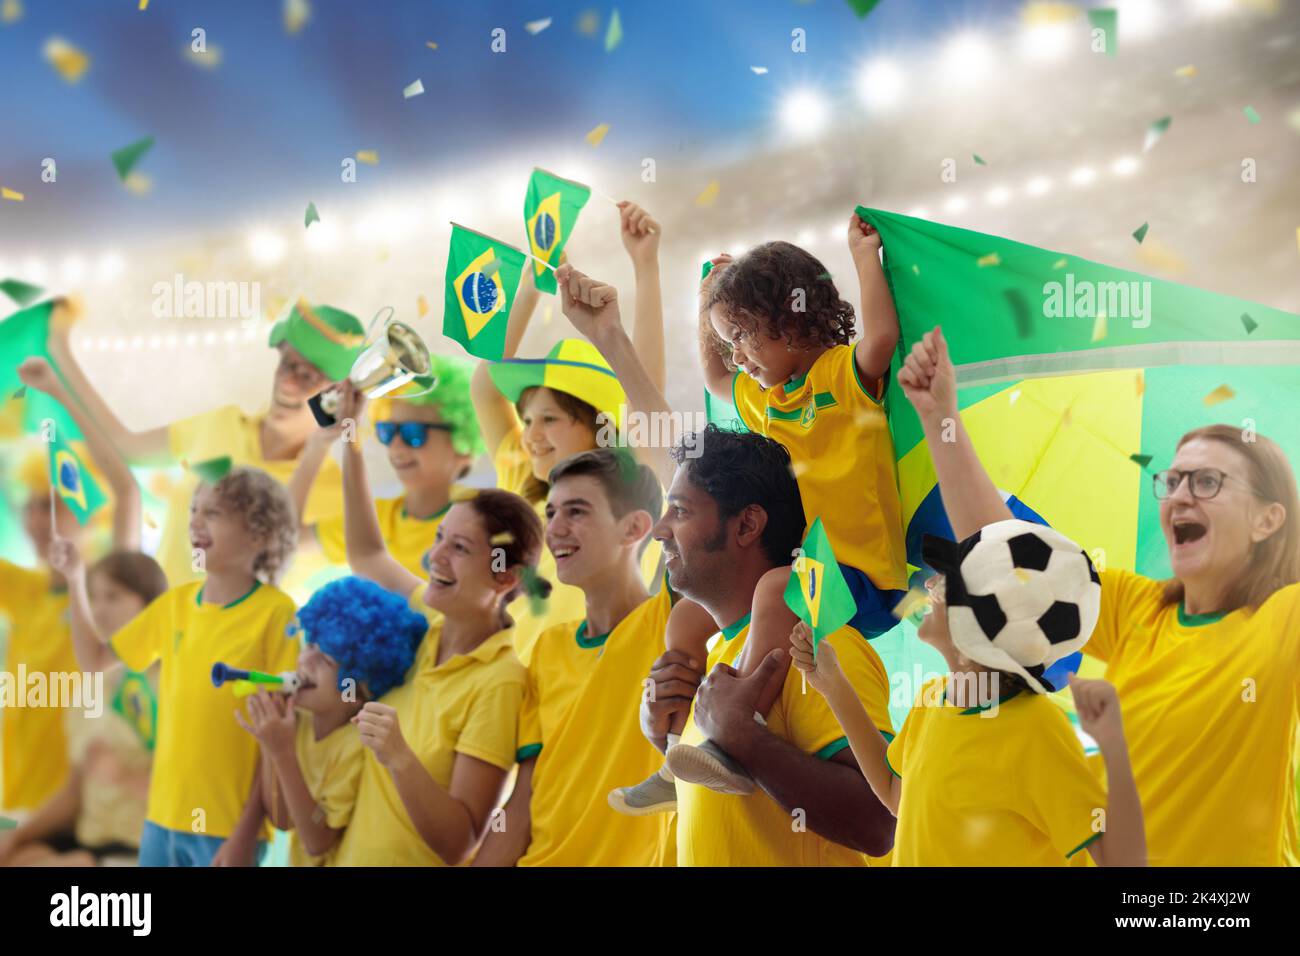 Brazil football supporter on stadium. Brazilian fans on soccer pitch watching team play. Group of supporters with flag and national jersey Stock Photo